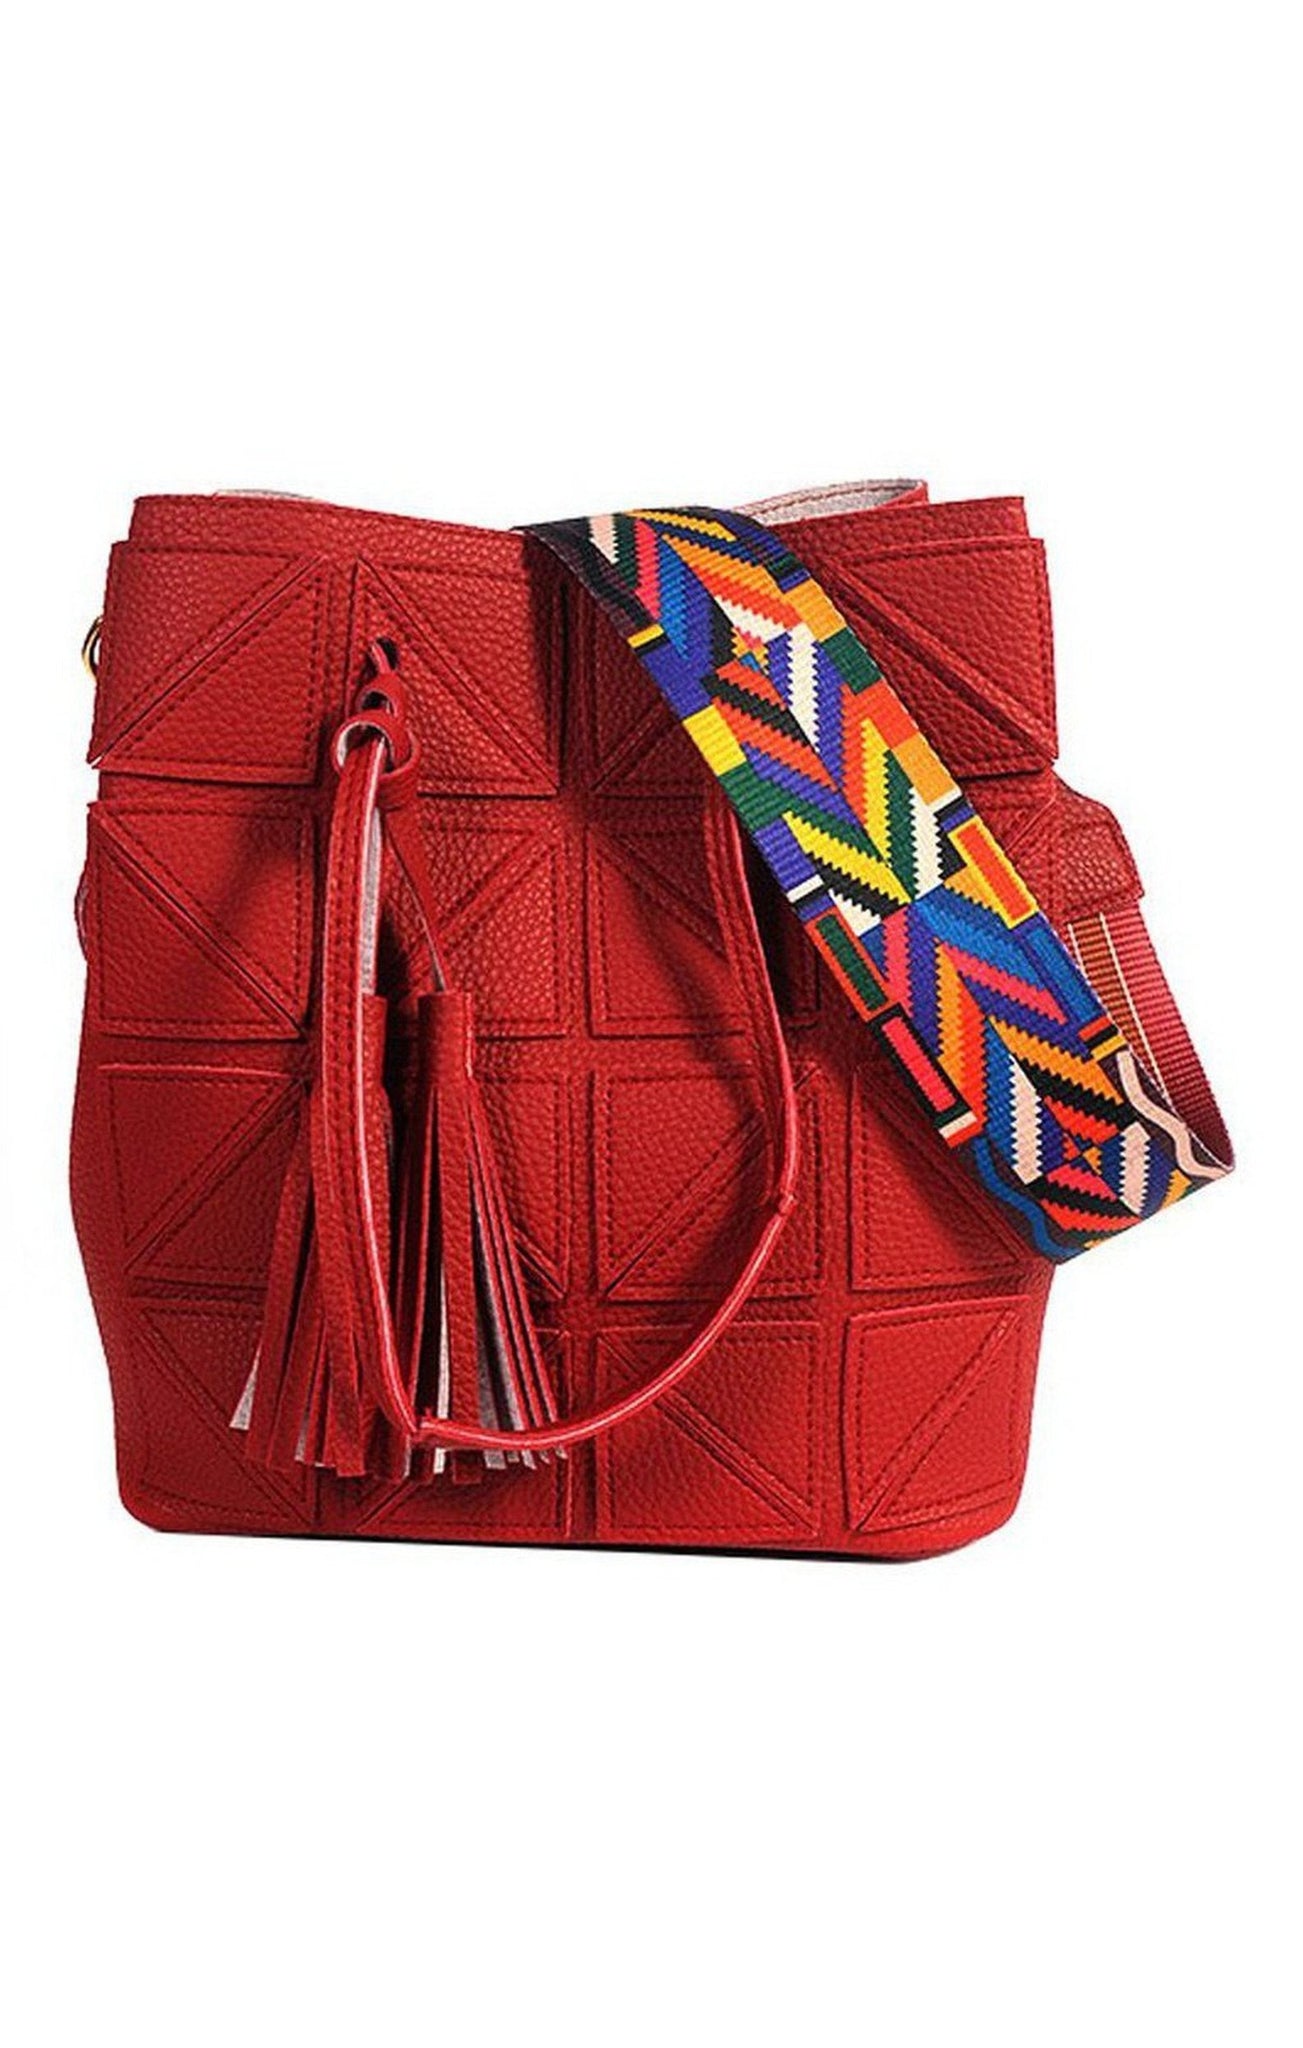 Vintage Style Ethnic Handmade Multicolor Strap Fashion Patchwork Bucket Bag With Tassel (MANY COLORS)